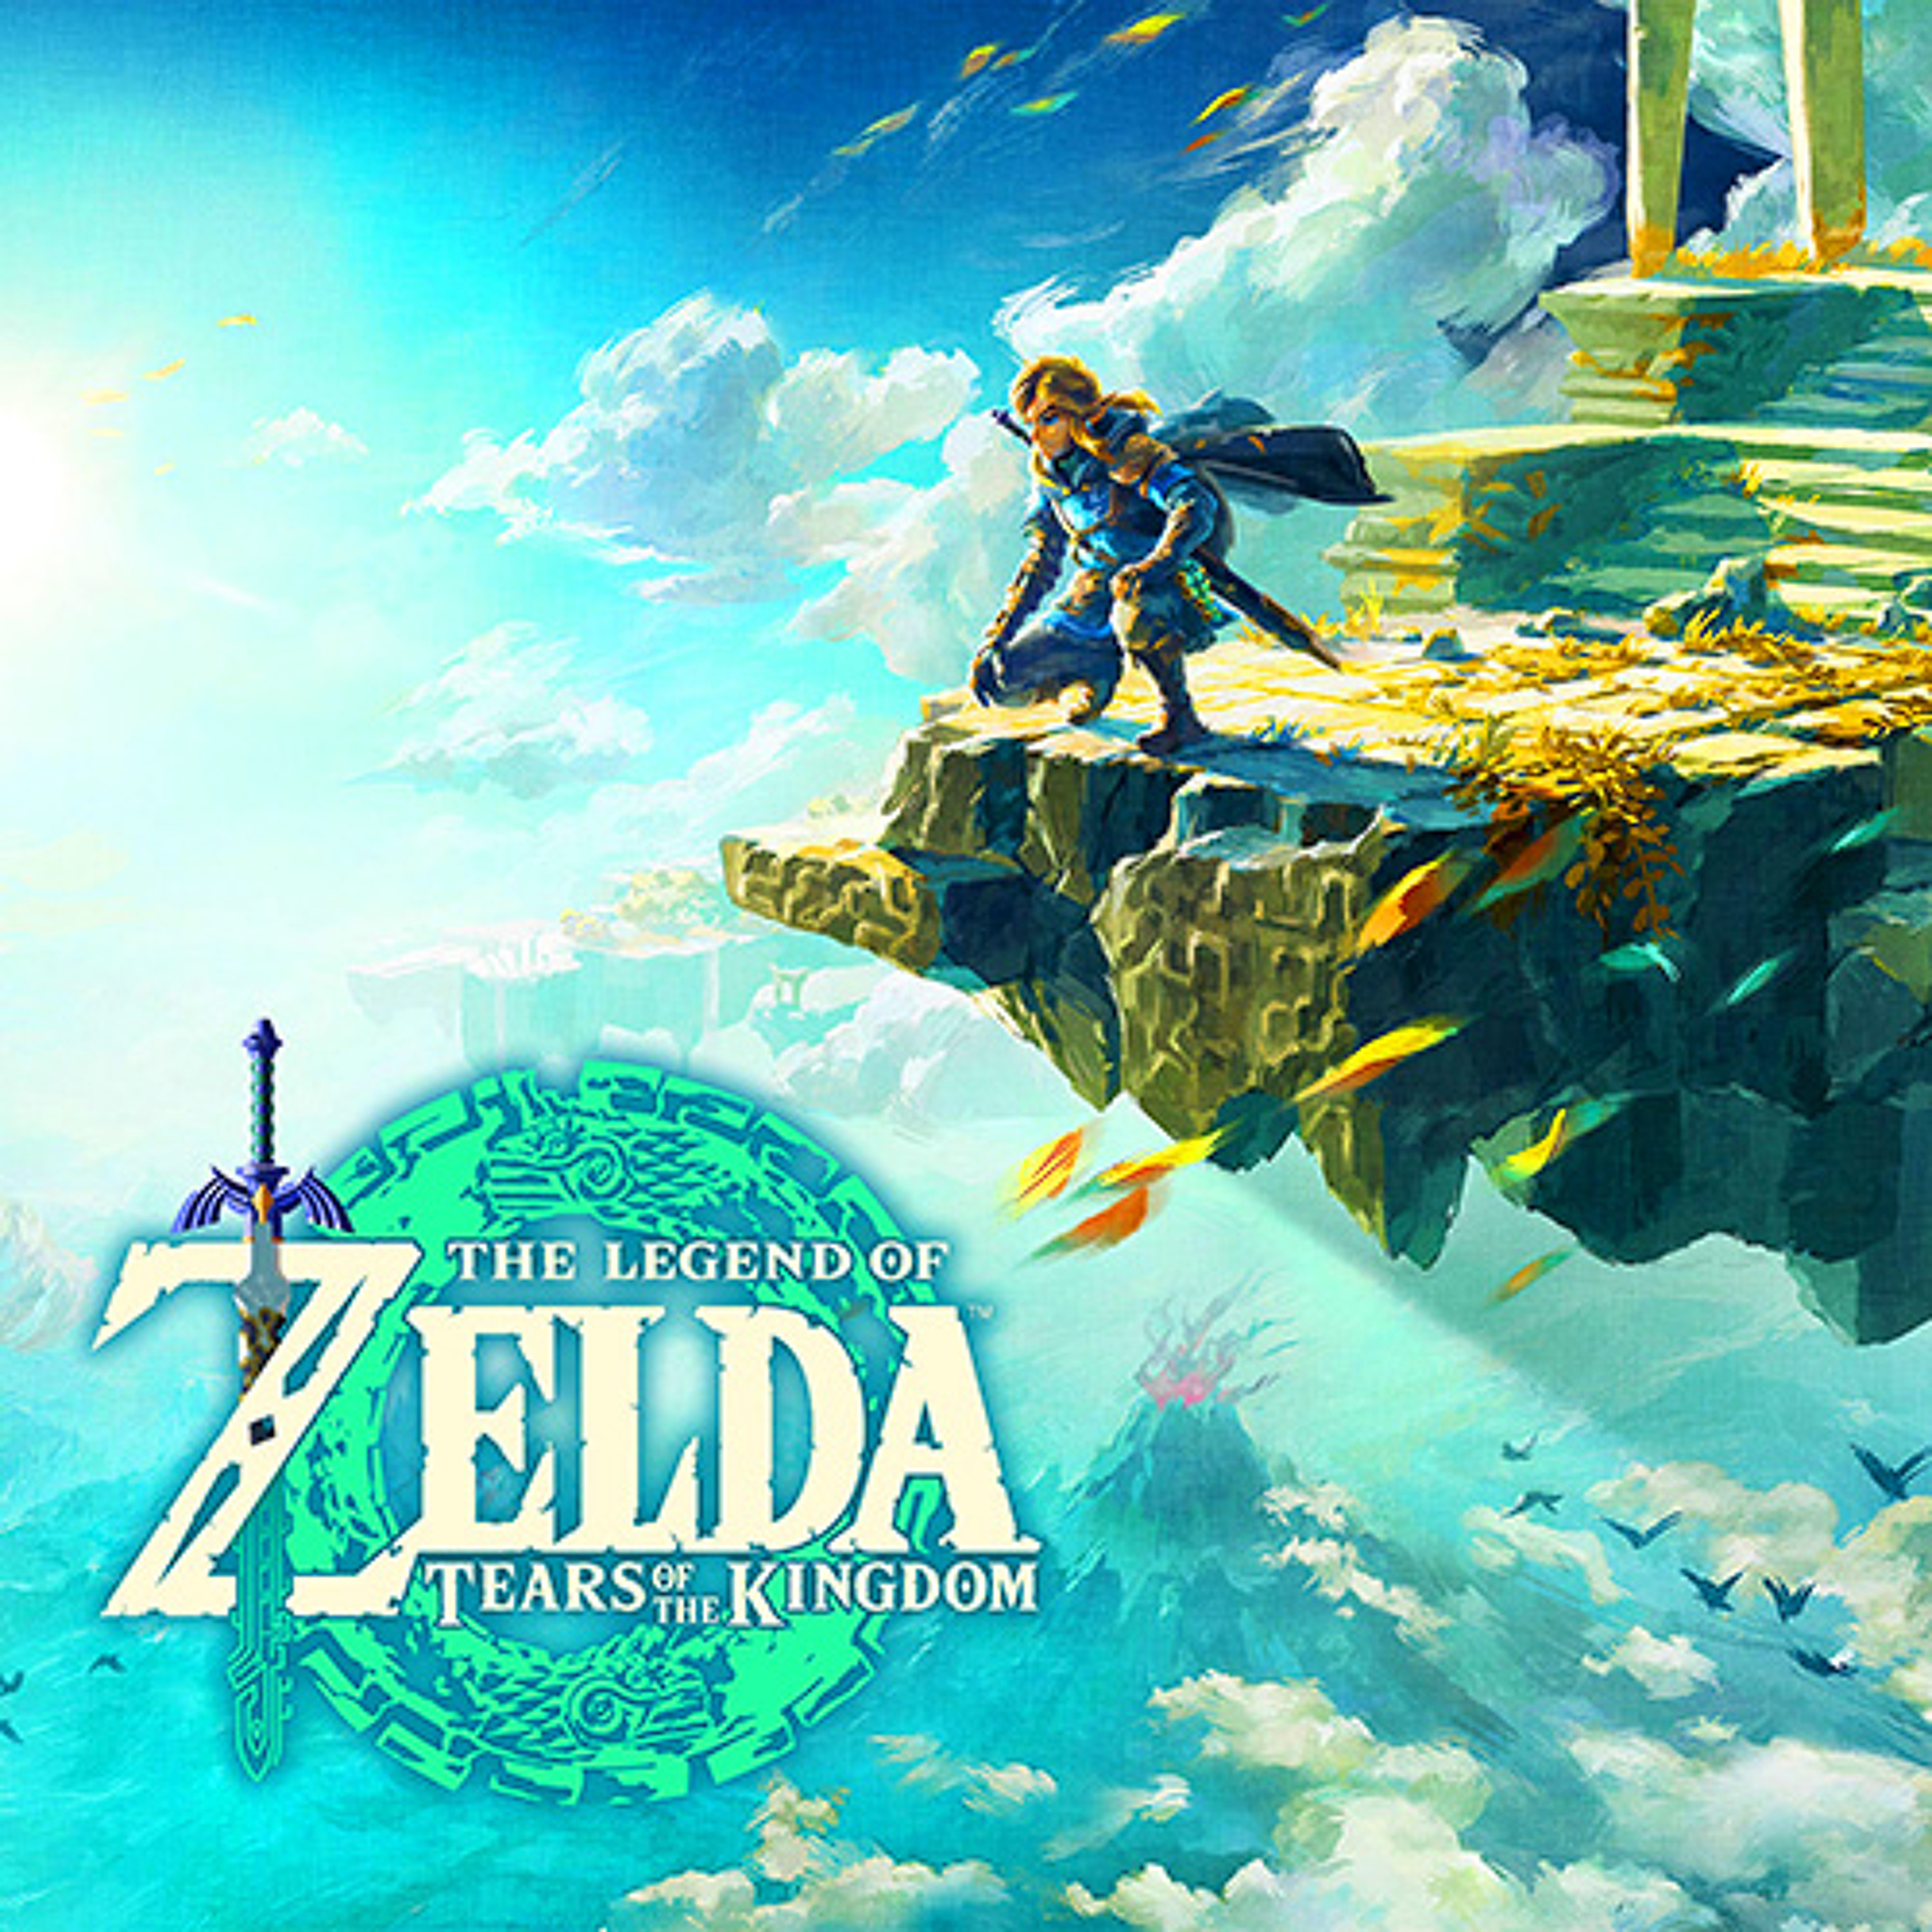 The Legend of Zelda: Tears of the Kingdom (Review)